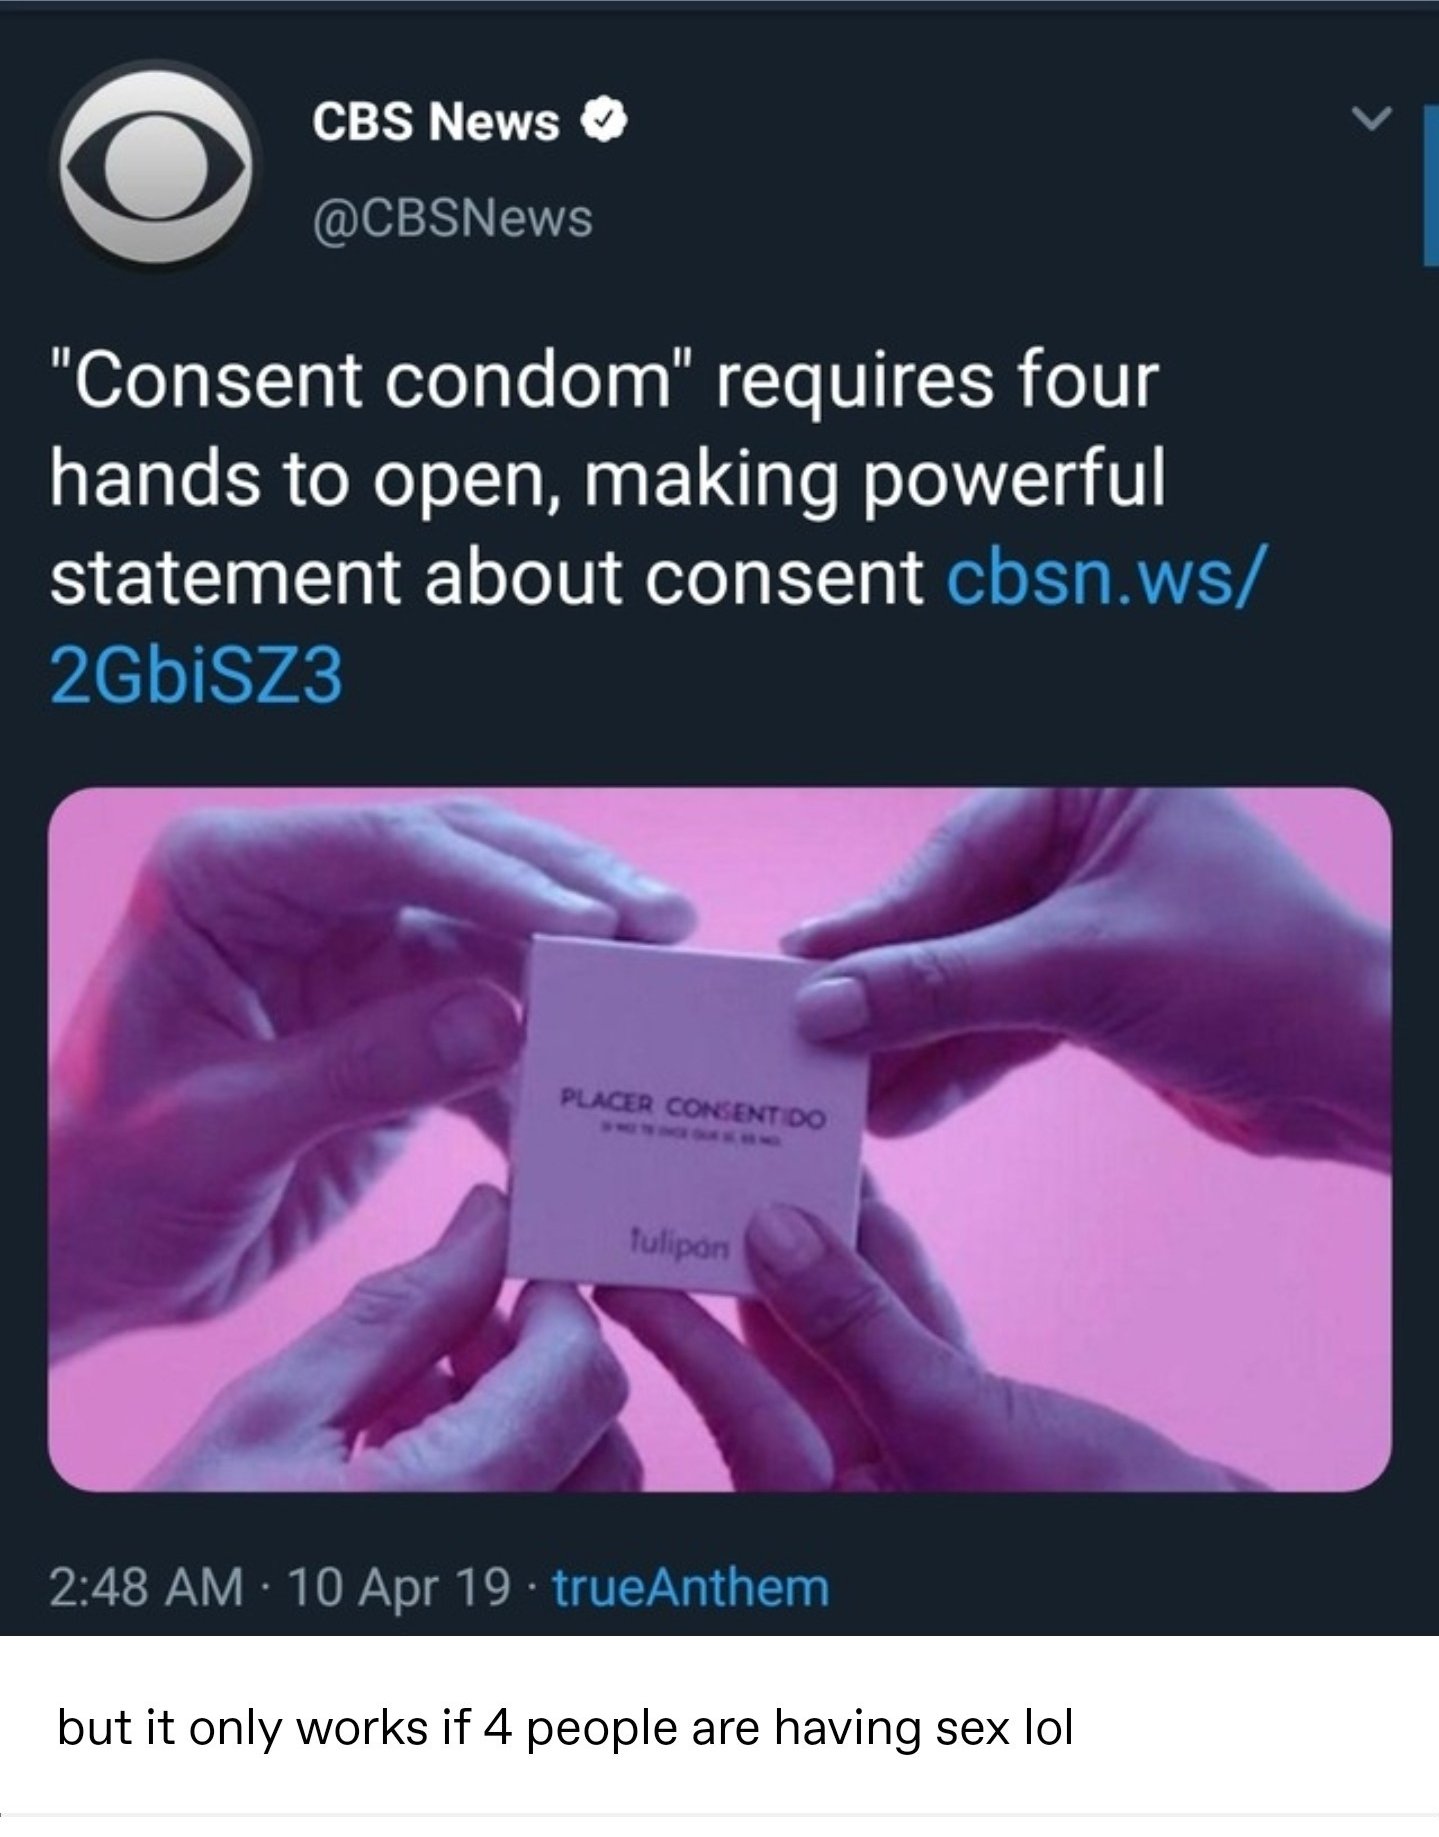 consent condoms meme - Cbs News "Consent condom" requires four hands to open, making powerful statement about consent cbsn.ws 2Gbisz3 Placer Consentido Tulipon 10 Apr 19. trueAnthem but it only works if 4 people are having sex lol